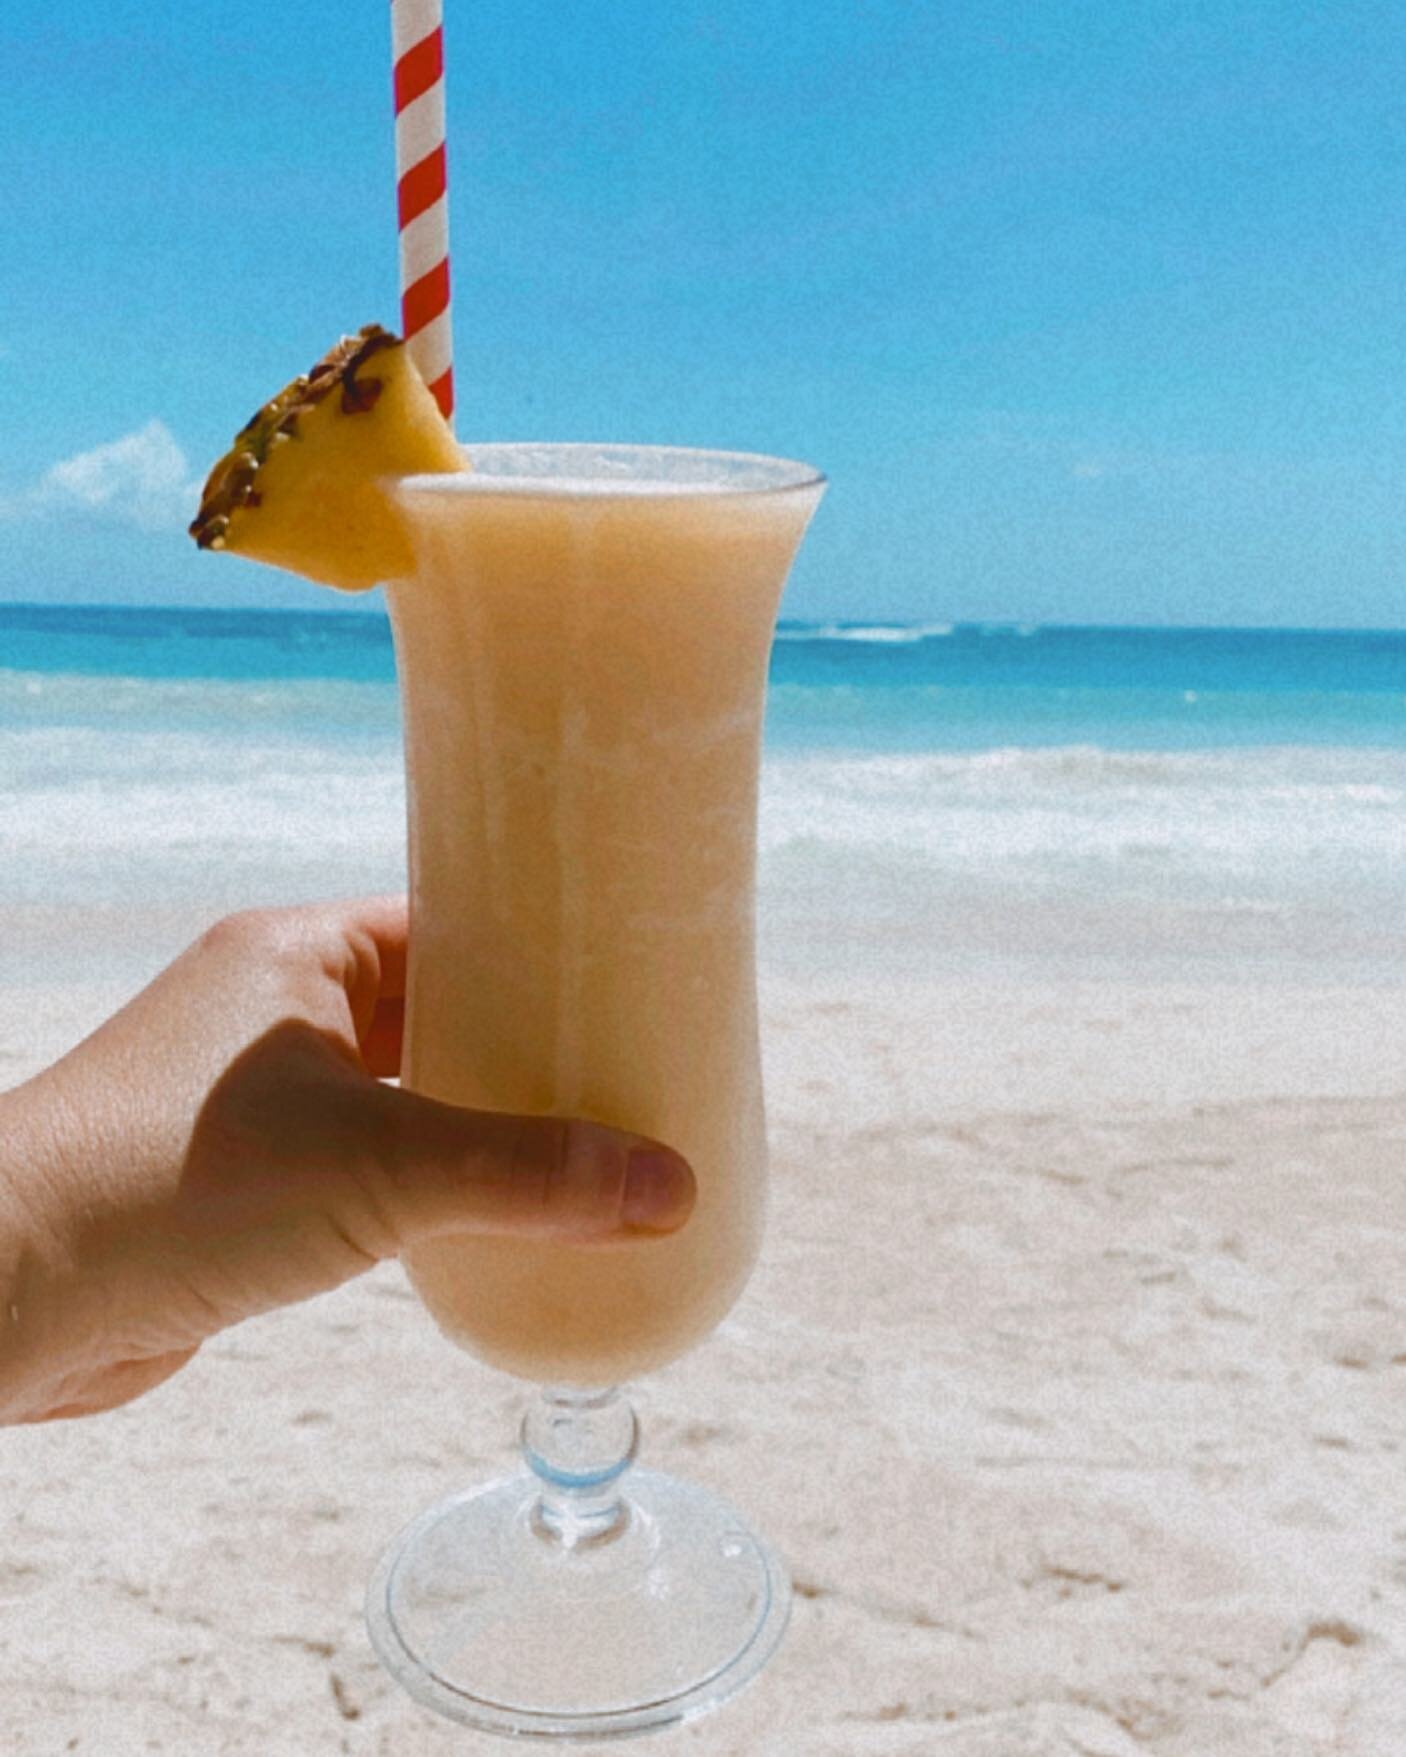 Cheers to all the new trips BPK is booking, many of which are to the BEACH ☀️

Did you know you can have completely different experiences at the beach, specially in the Caribbean? That&rsquo;s why BPK Travel always tries to get to know what type of &